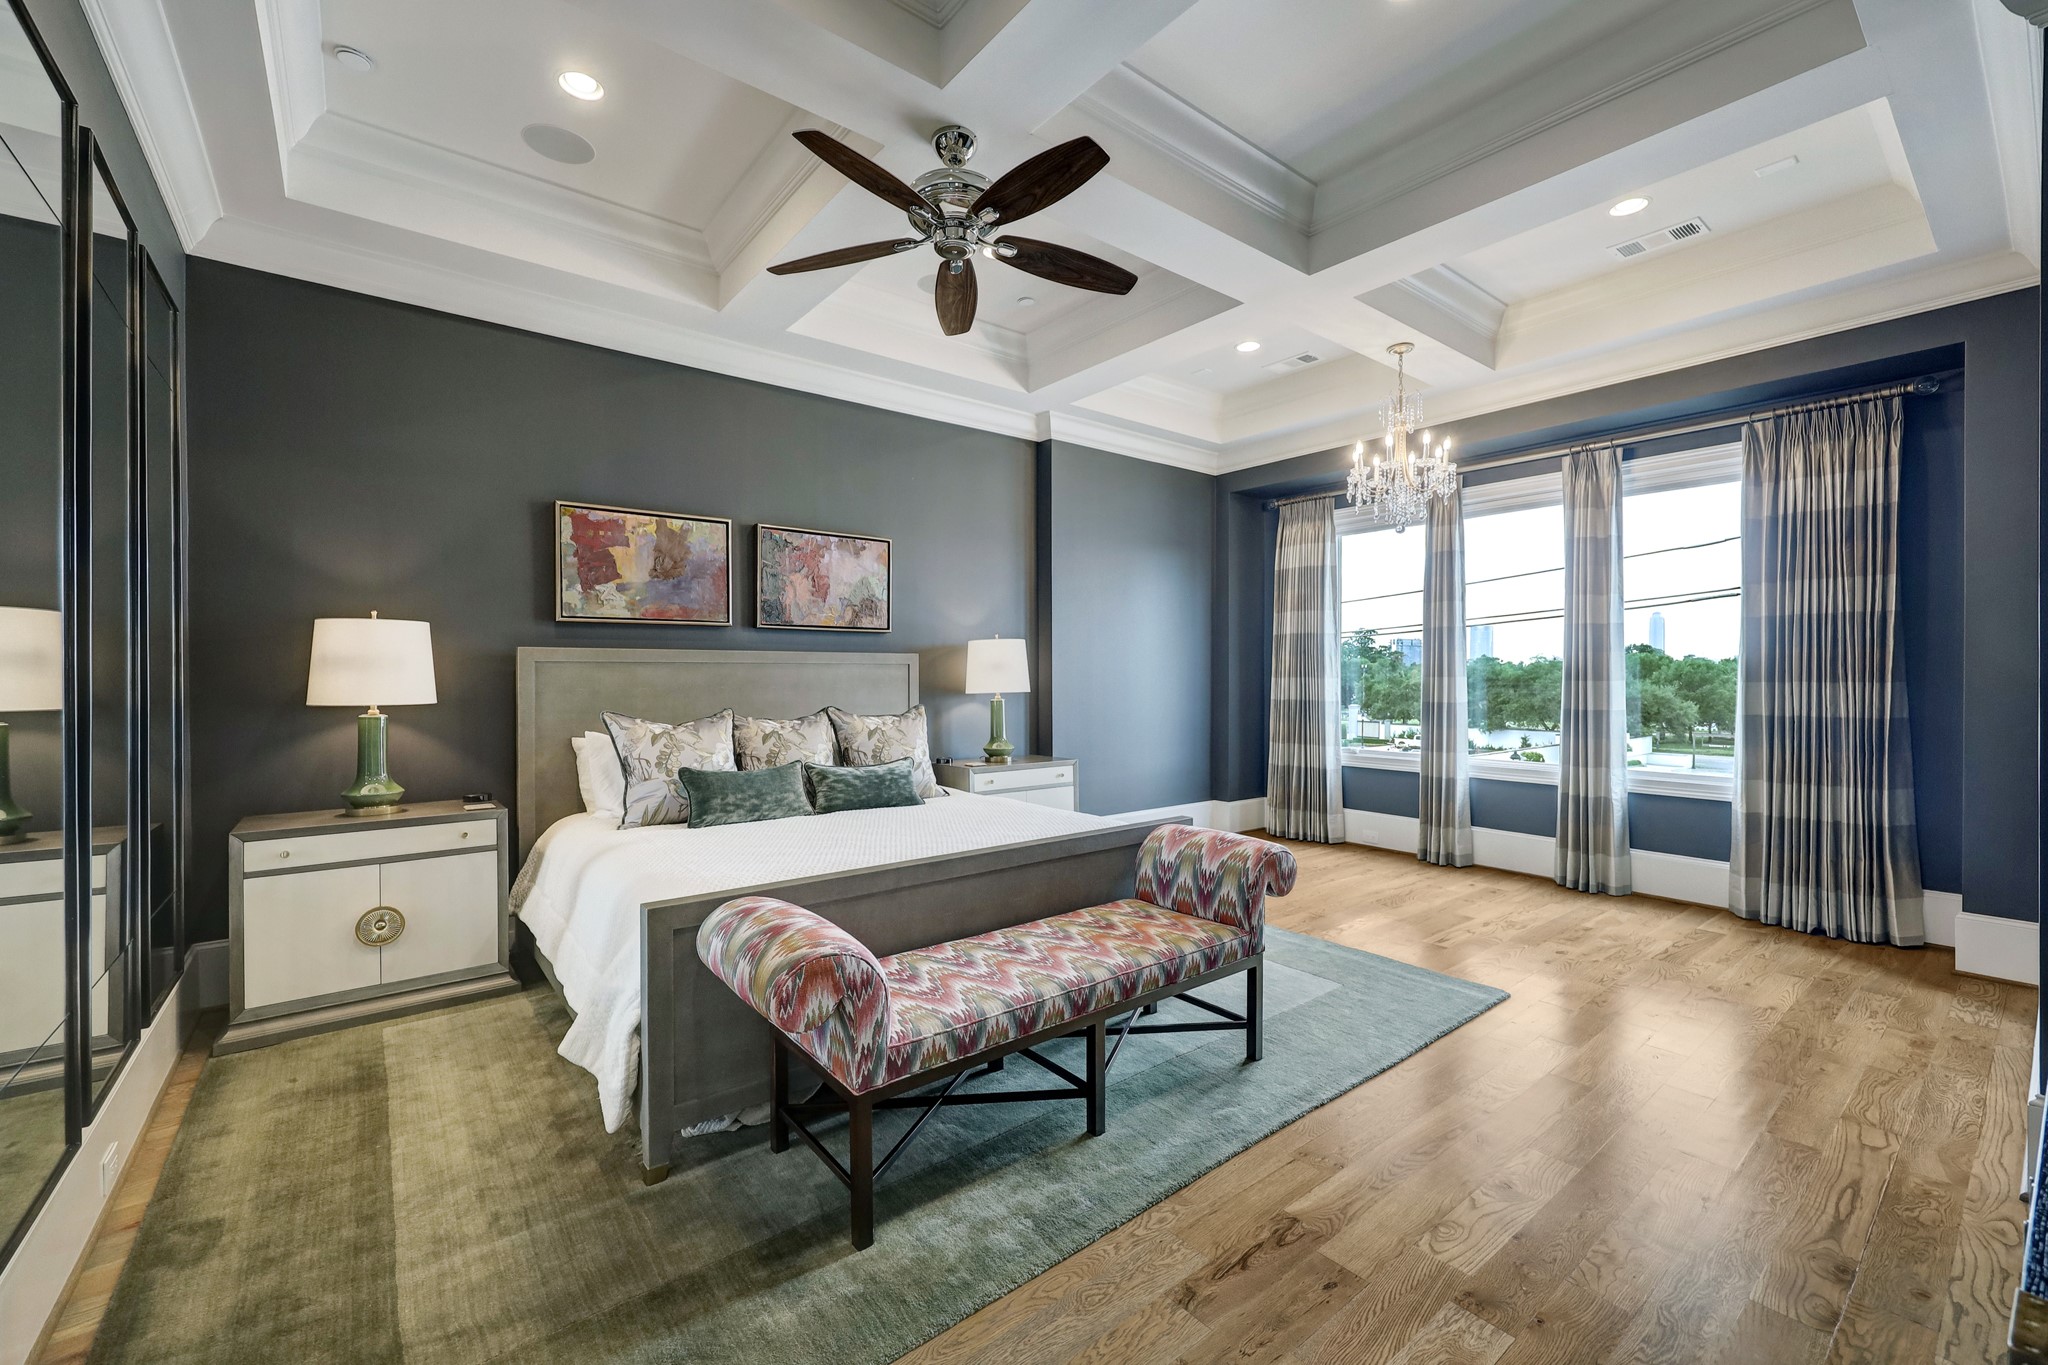 The large primary bedroom features a coffered ceiling, ceiling fan, crown molding, and large windows that bring in tons of natural light.